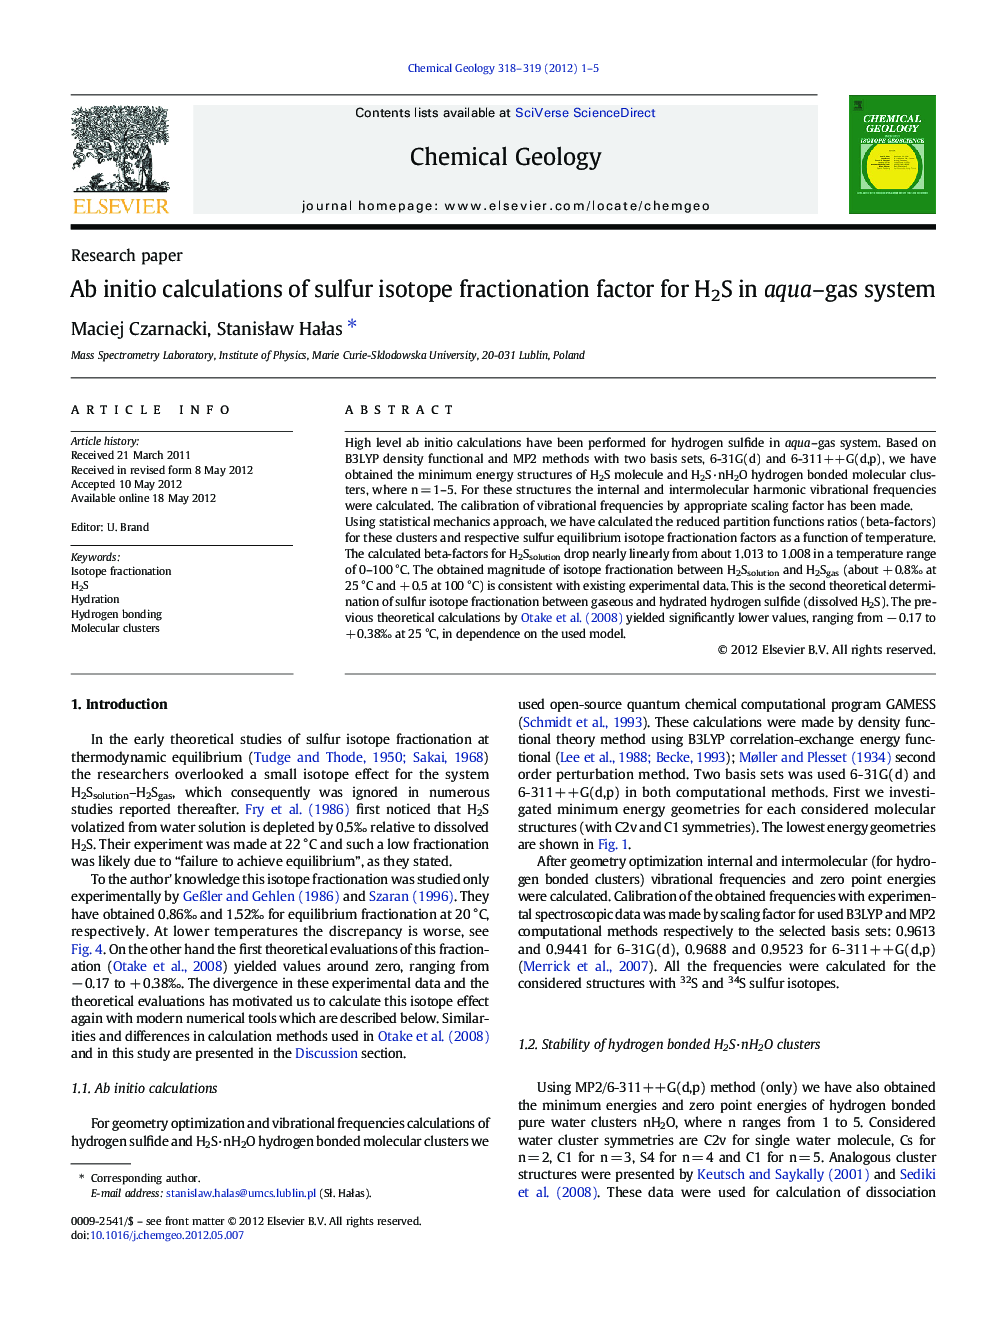 Ab initio calculations of sulfur isotope fractionation factor for H2S in aqua–gas system